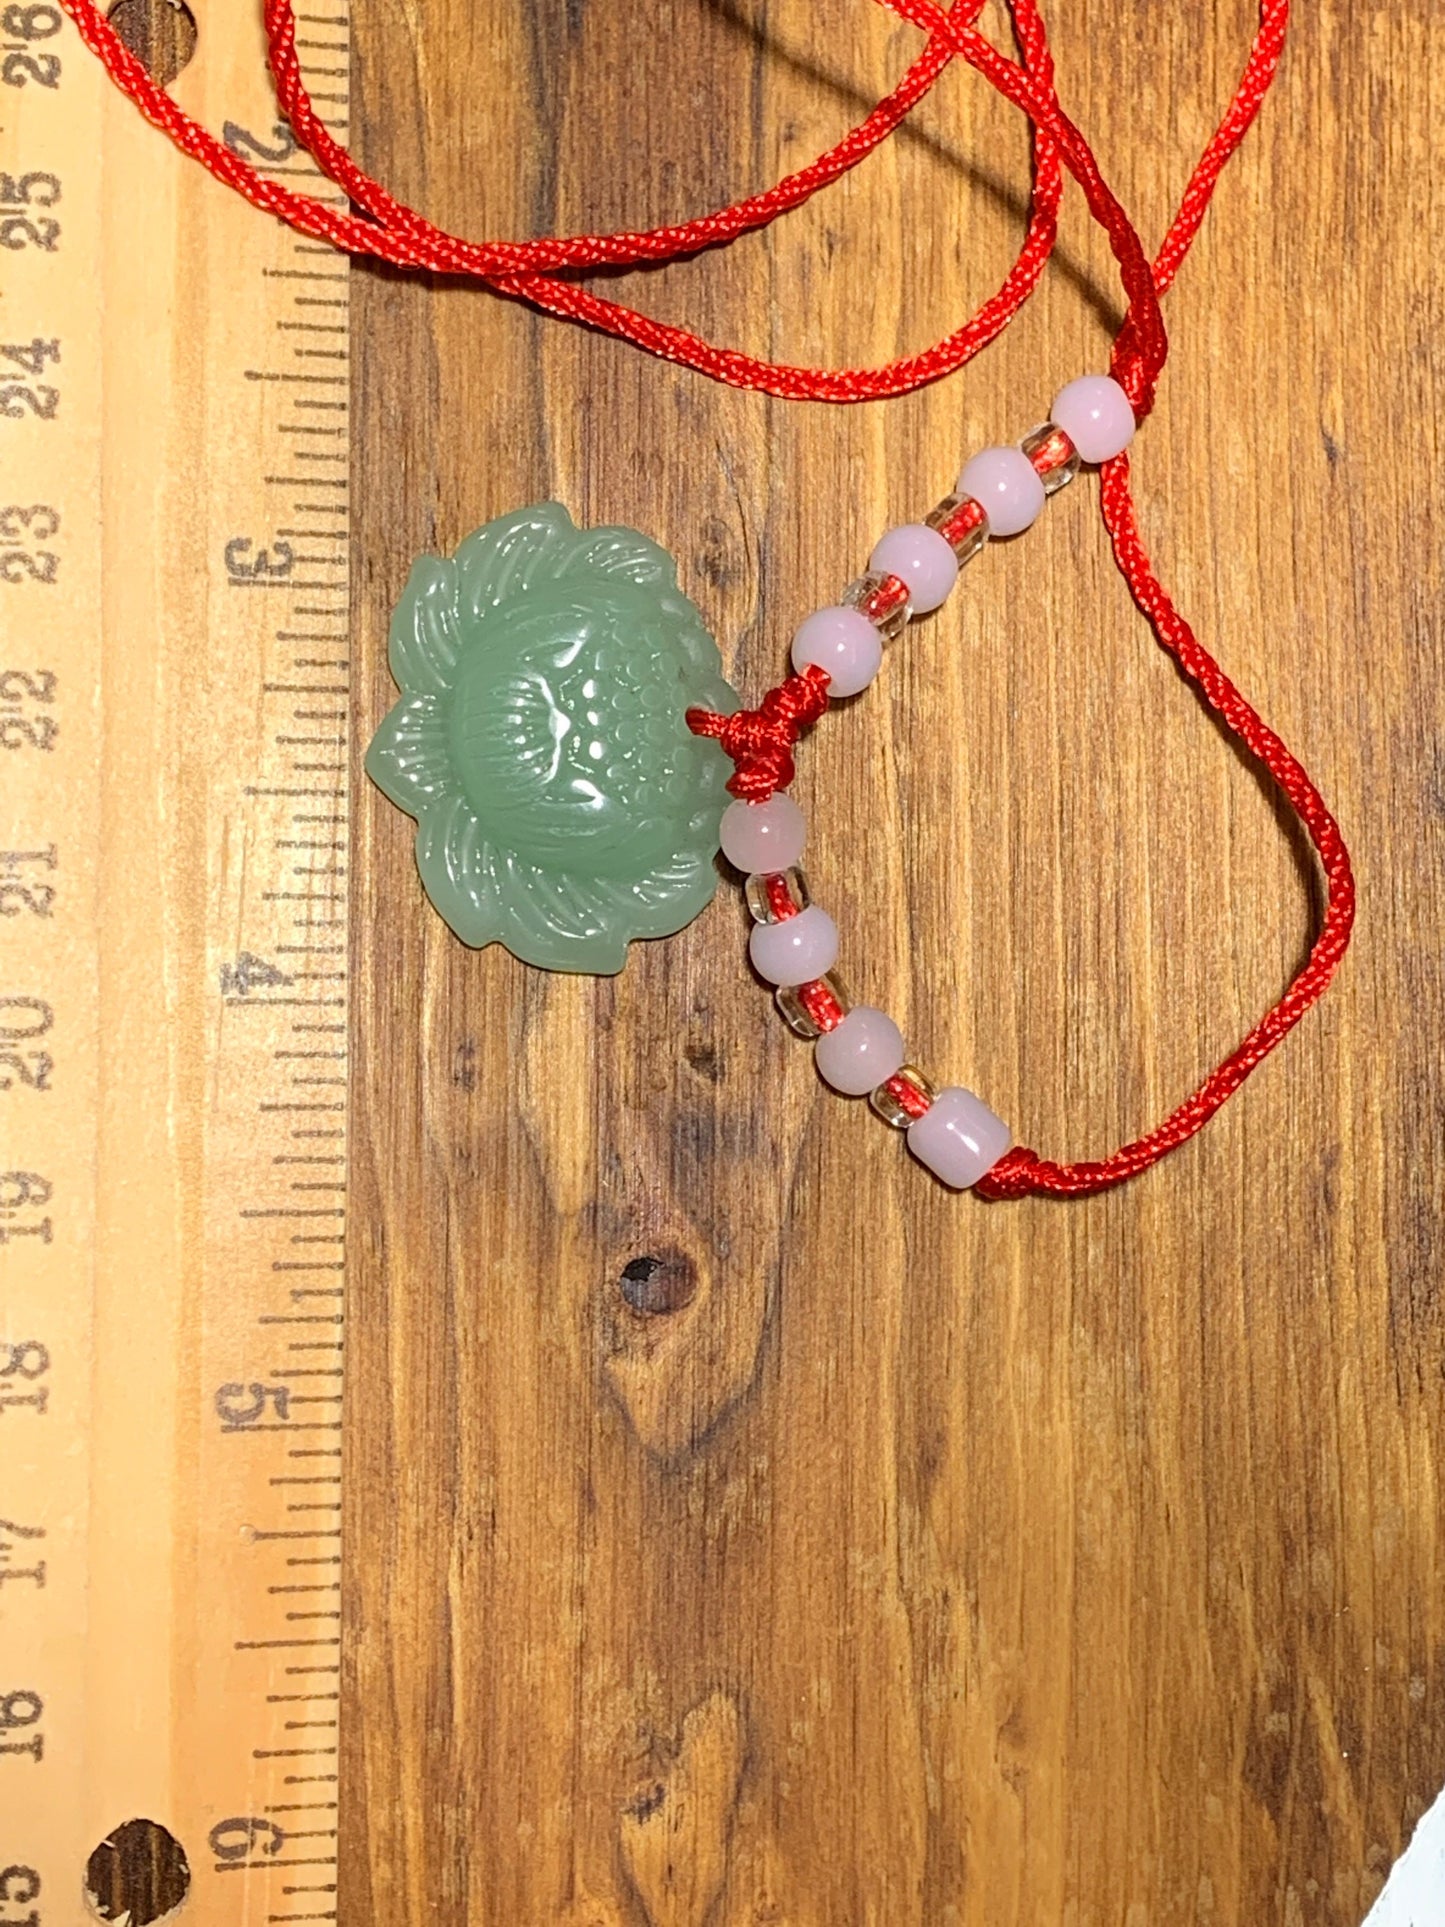 This green jade lotus pendant, carved with intricate detail, is attatched to a red cord with 4 white beads on either side, displayed next to a ruler to show size.   